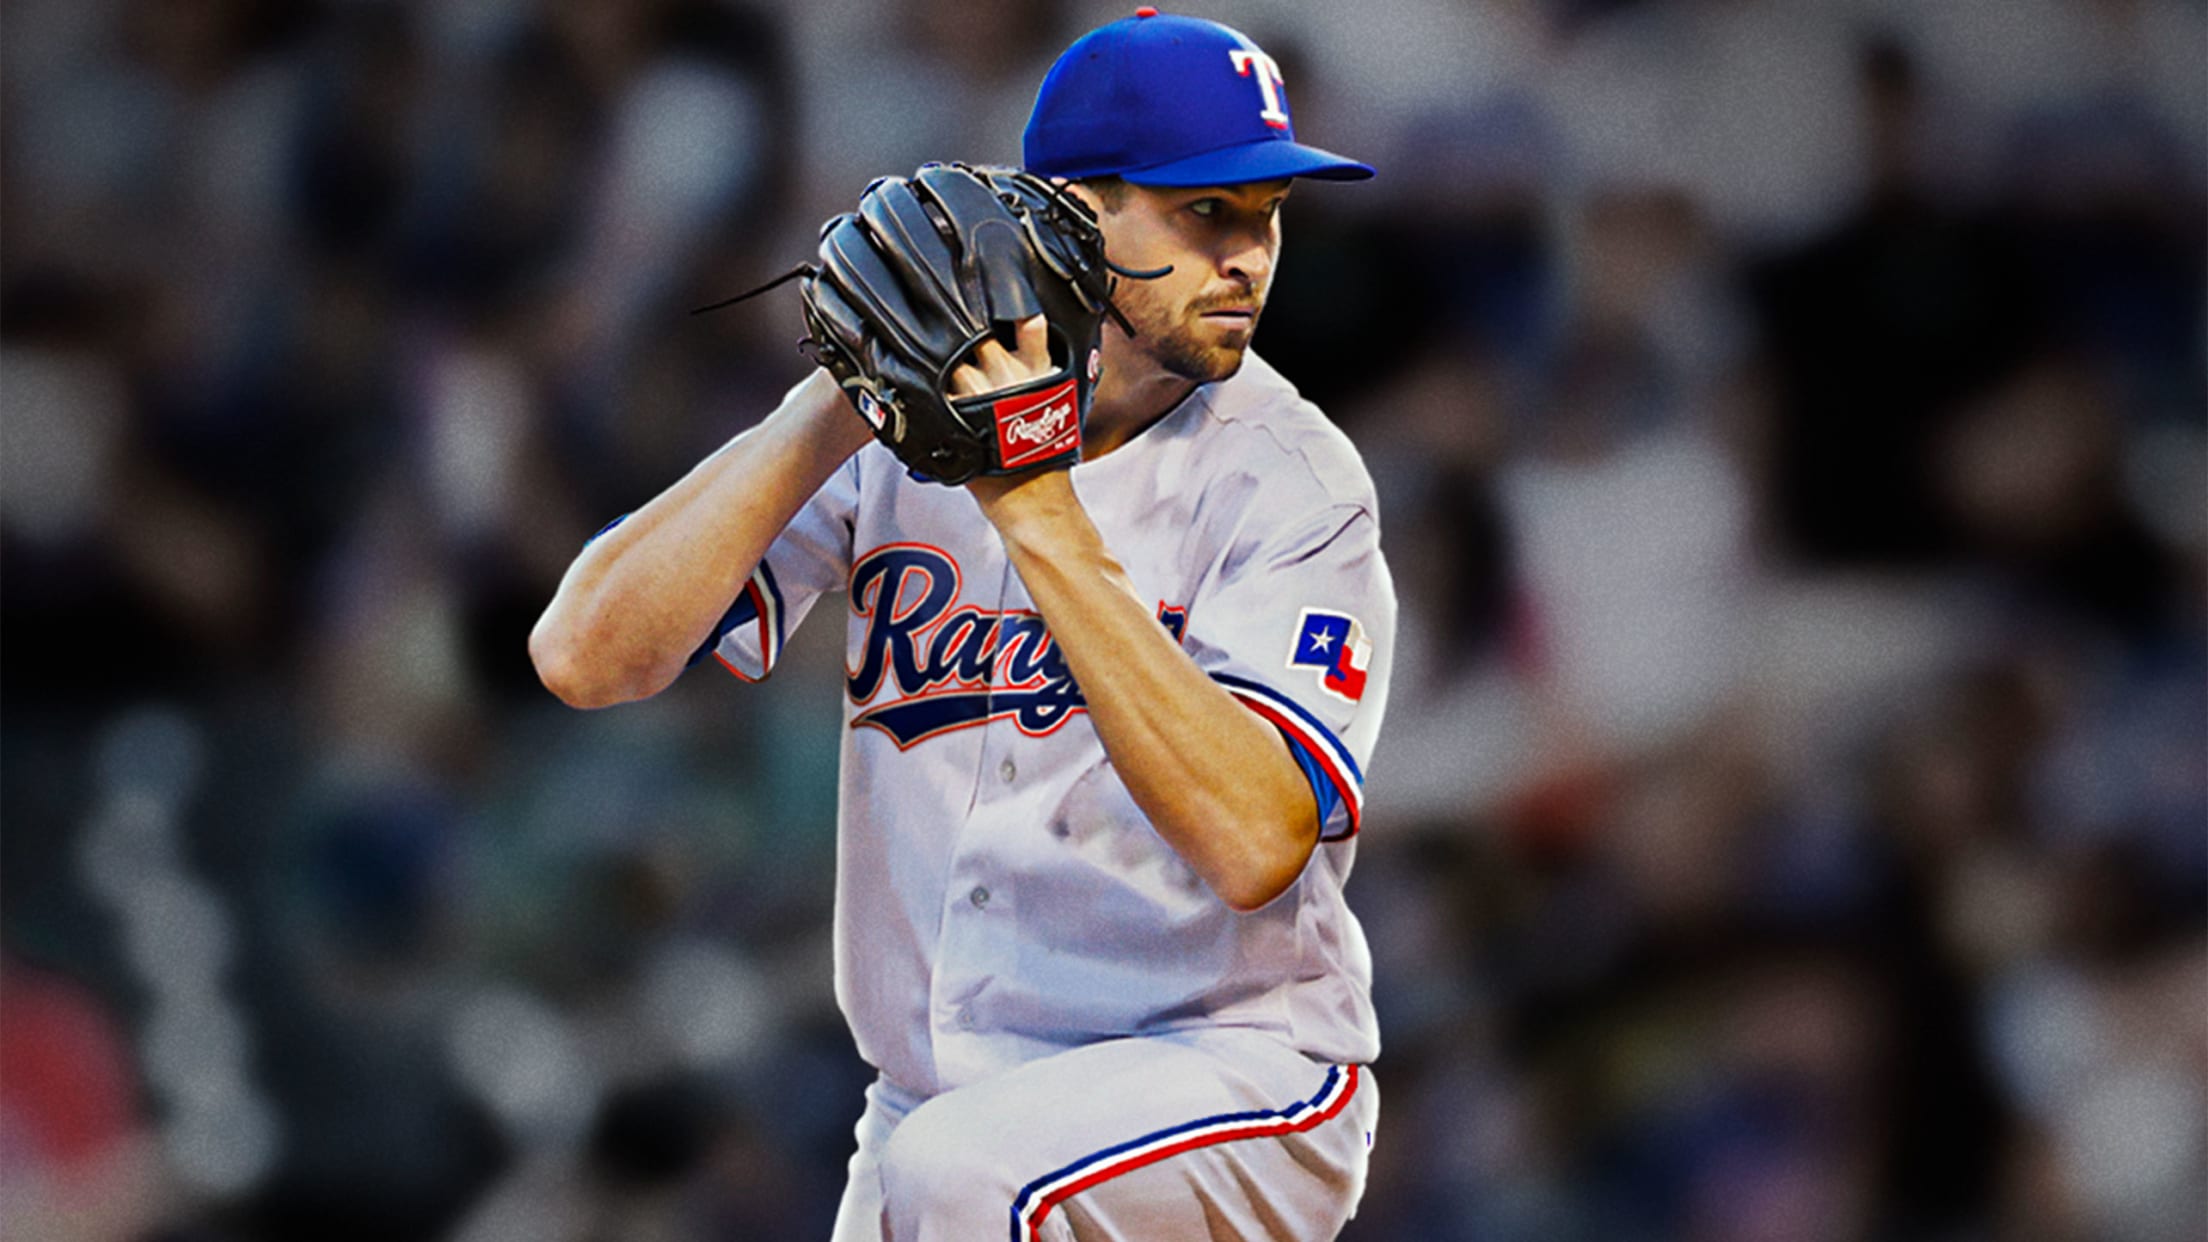 A photo illustration showing Jacob deGrom in a Rangers uniform